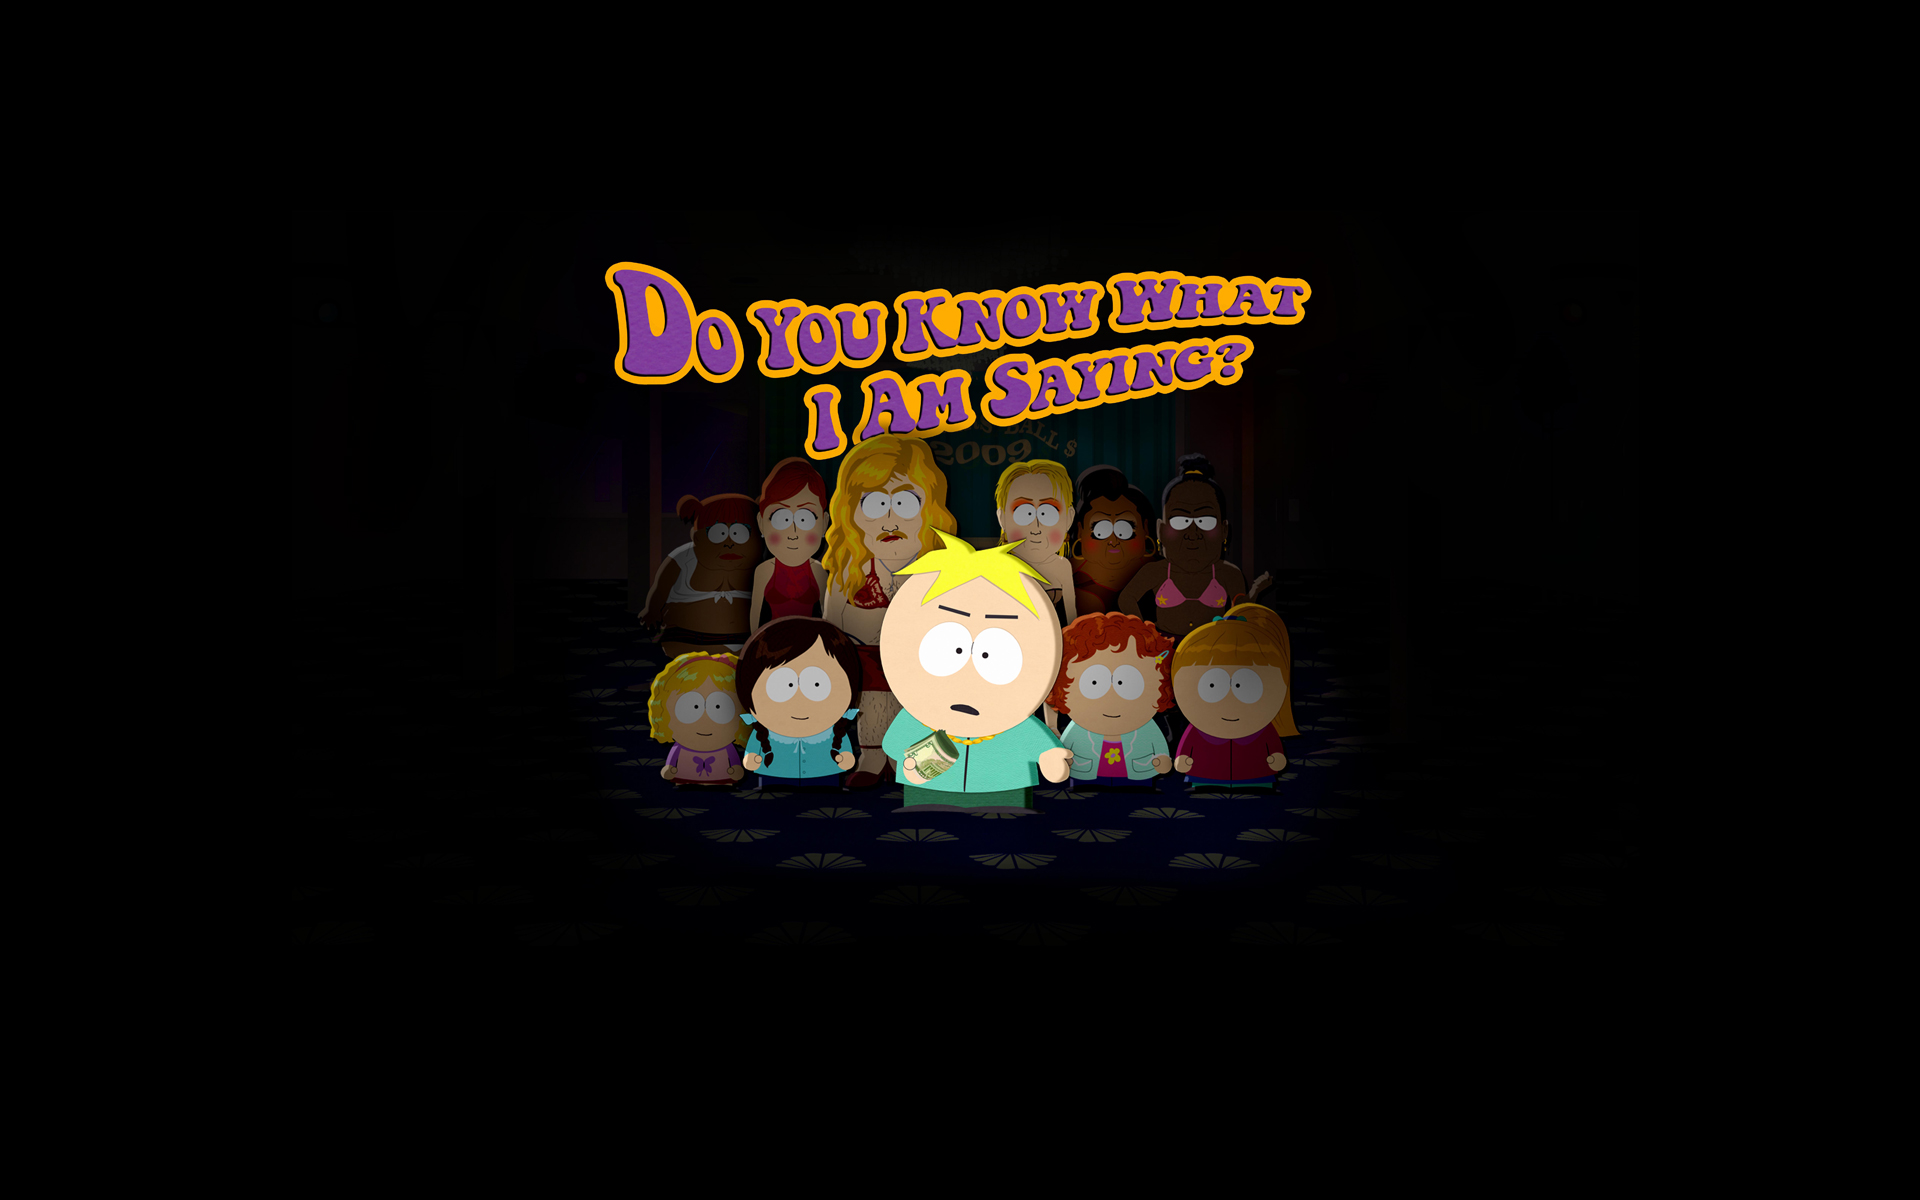 Funny South Park Wallpaper With Butters Image Amp Pictures